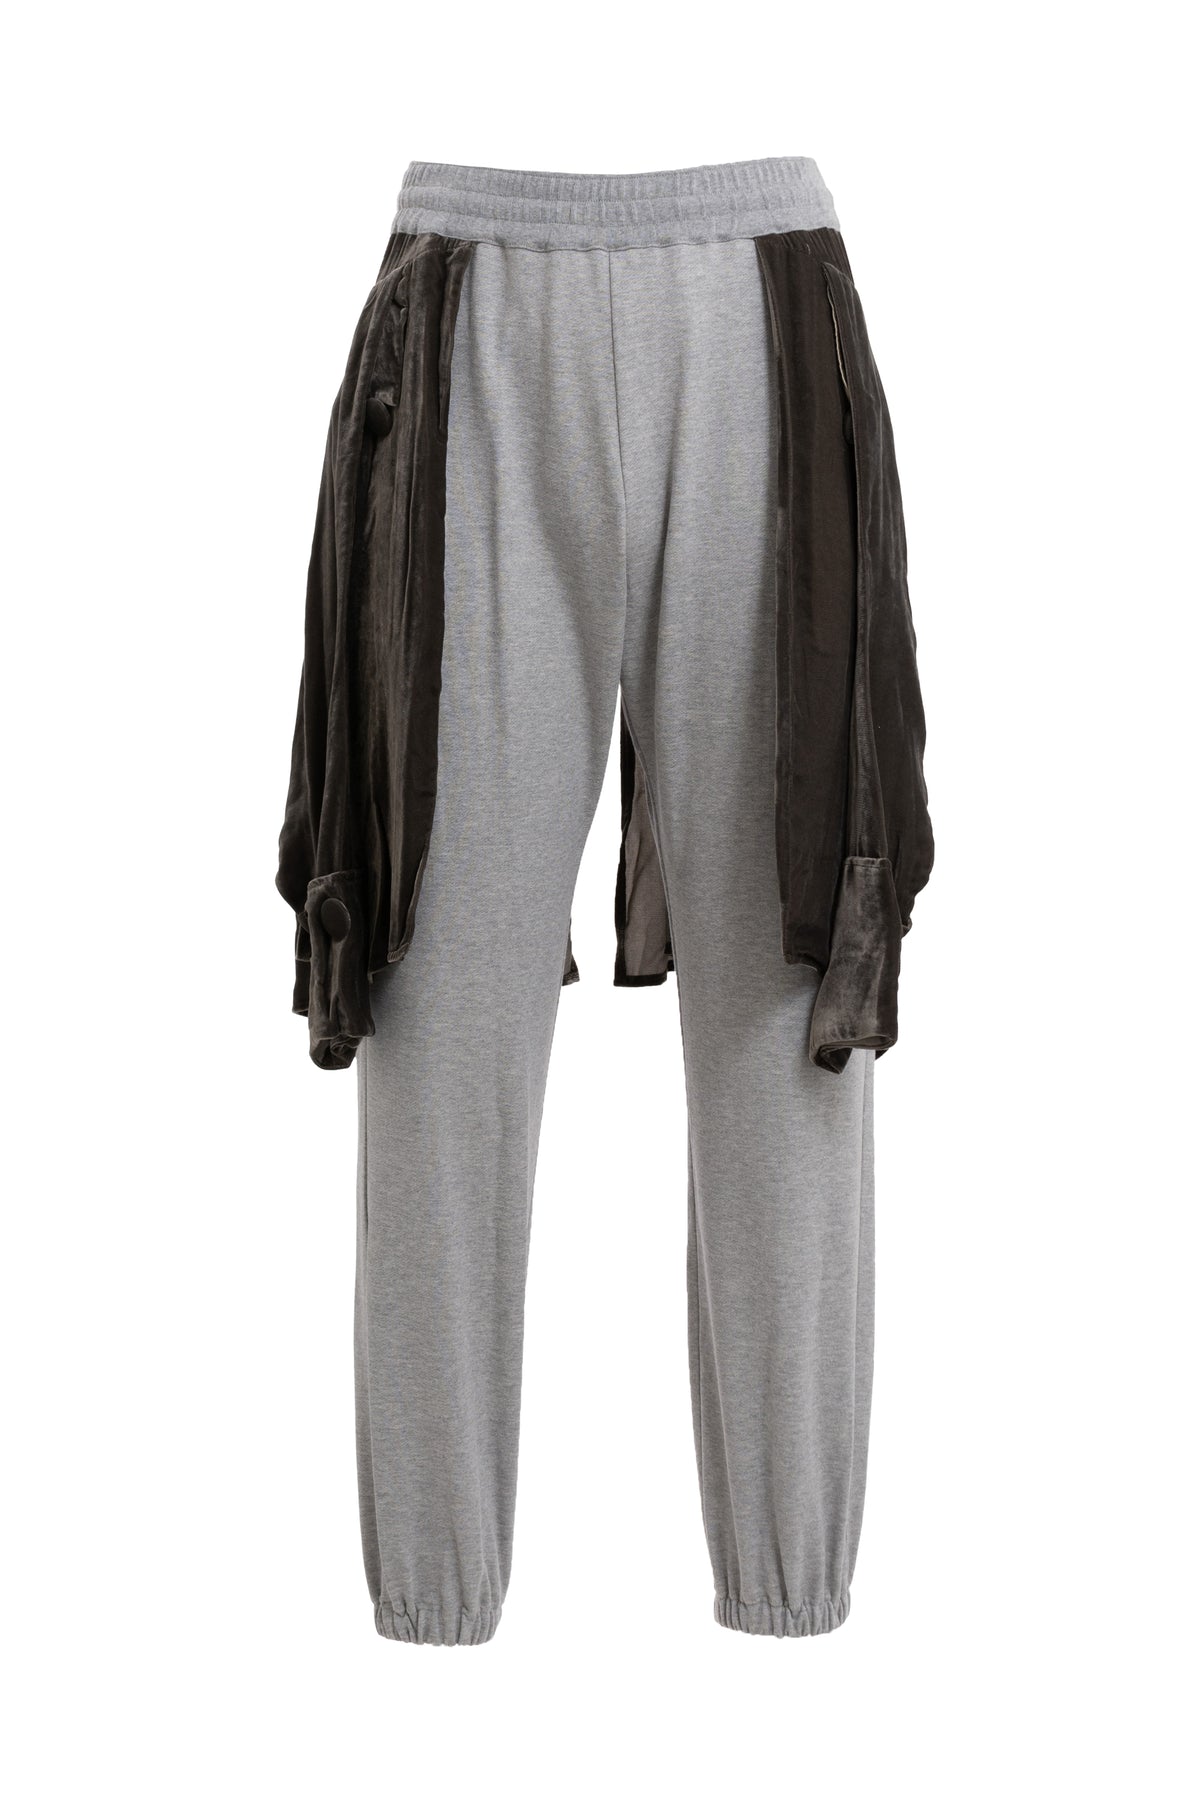 MARRIAGE SWEAT PANTS / GRY